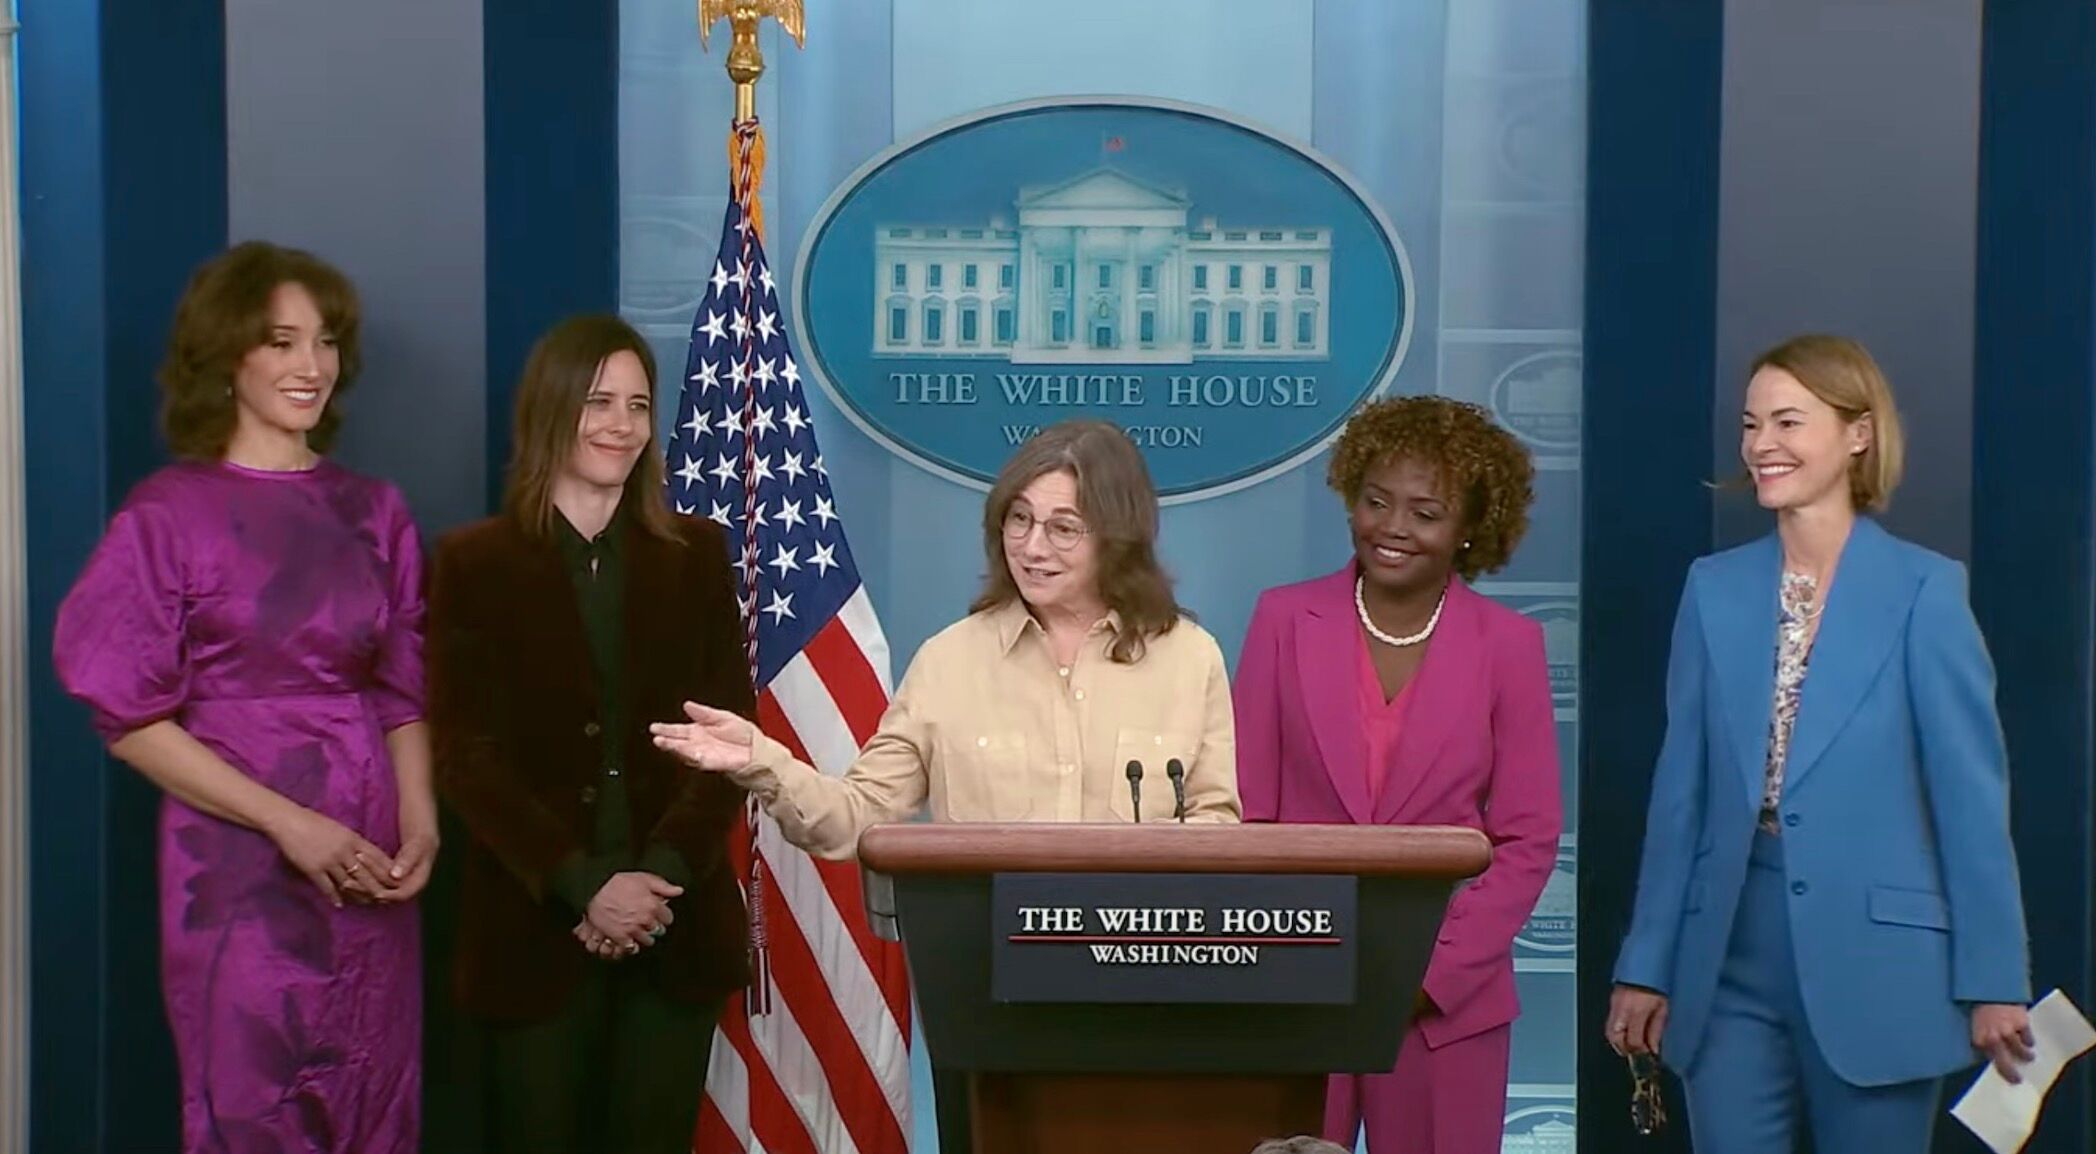 "L Word" creator Ilene Chaiken speaks at a White House press briefing surrounded by members of the "L Word" cast